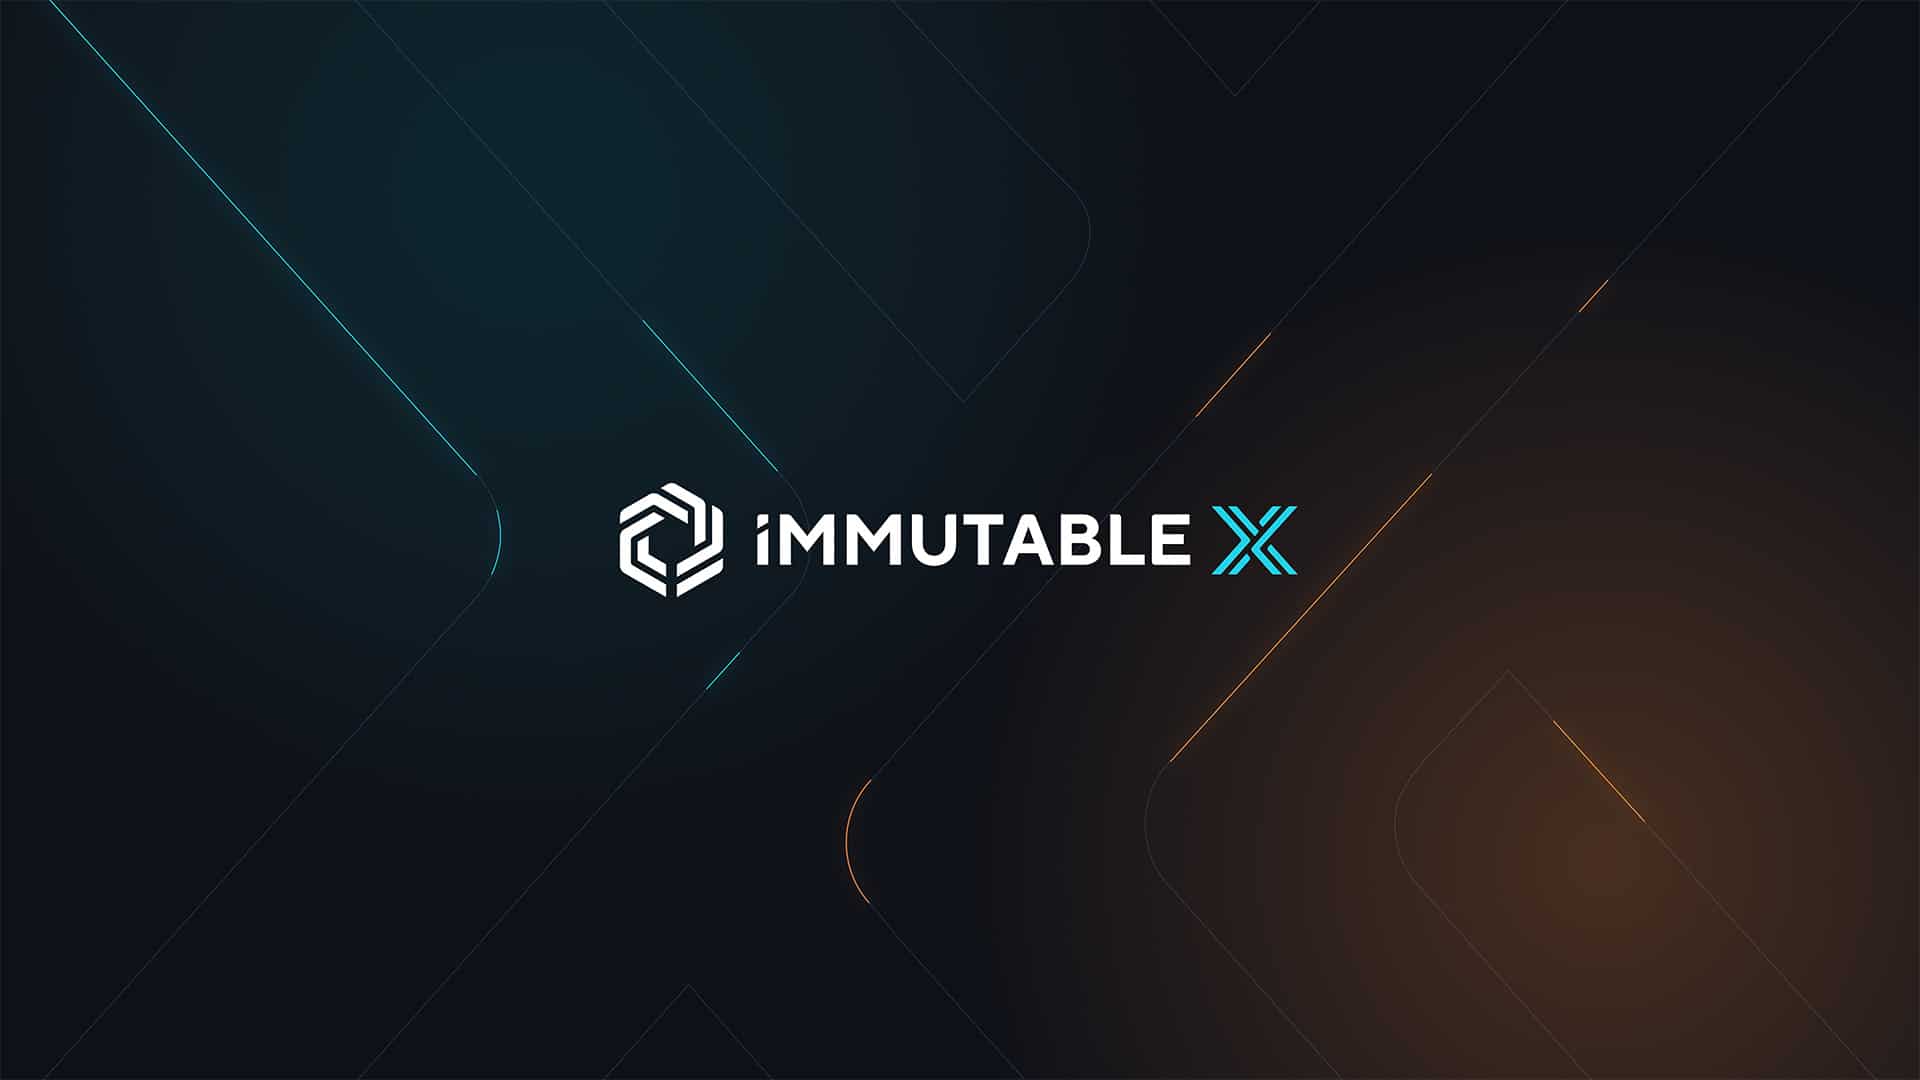 Immutable Announces New Layoff Amid Slump In Crypto Prices